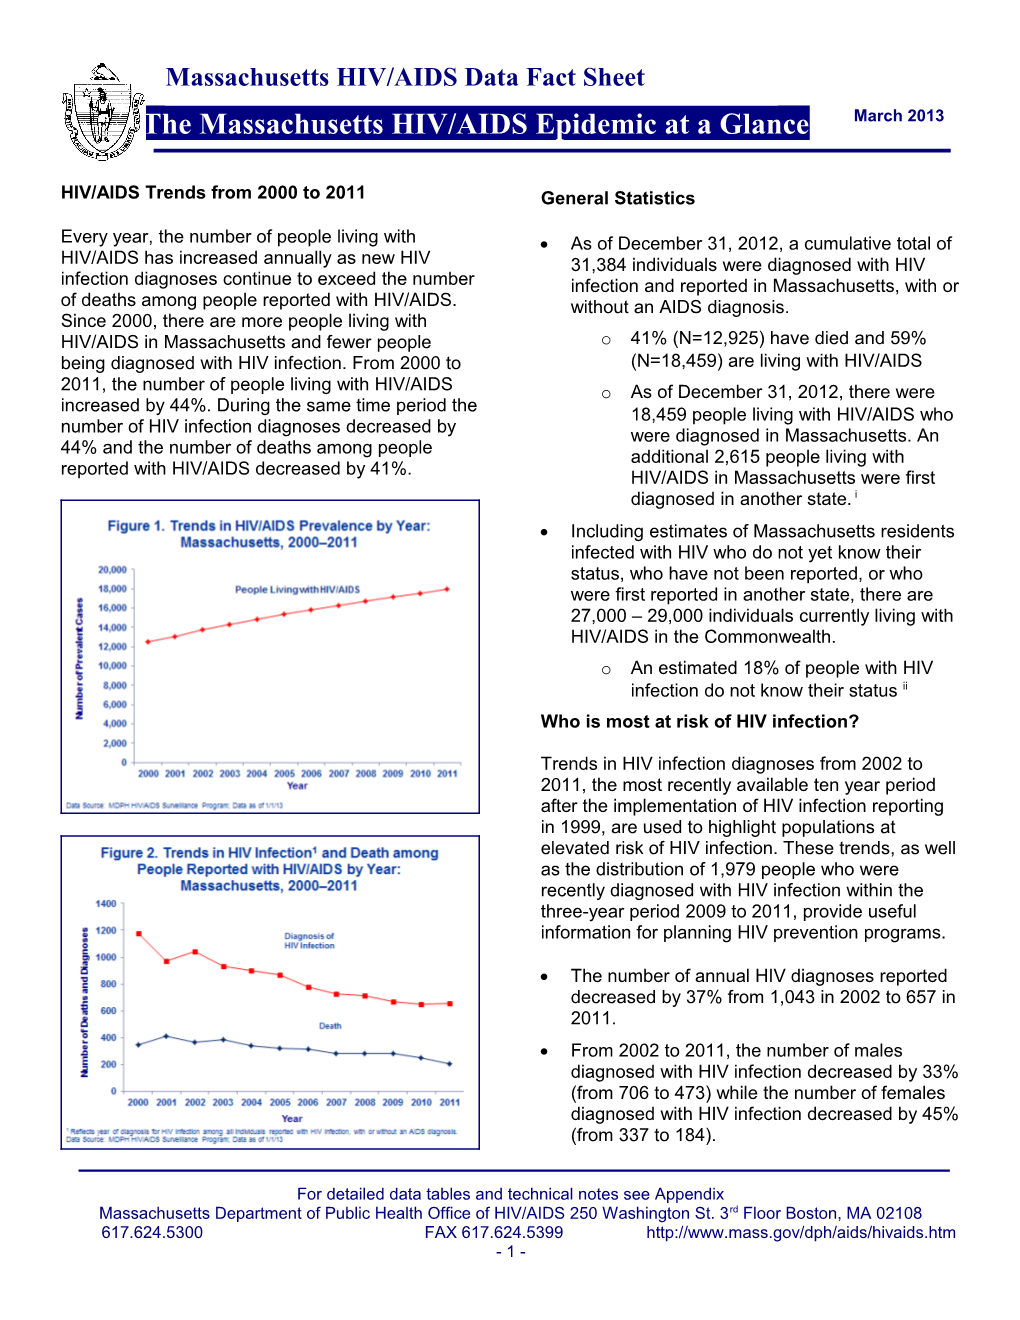 HIV/AIDS Trends from 1999 to 2007